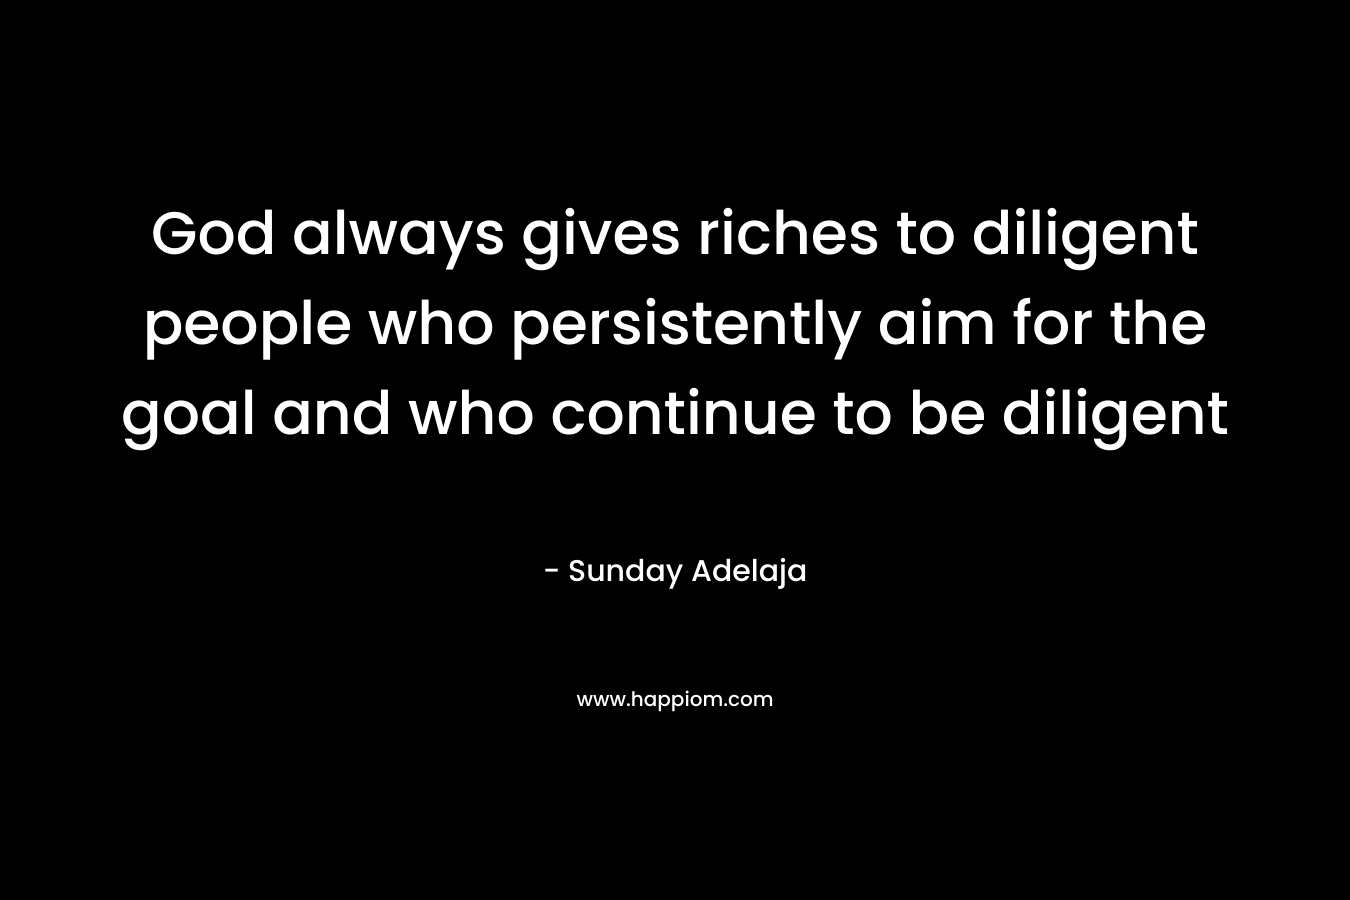 God always gives riches to diligent people who persistently aim for the goal and who continue to be diligent – Sunday Adelaja